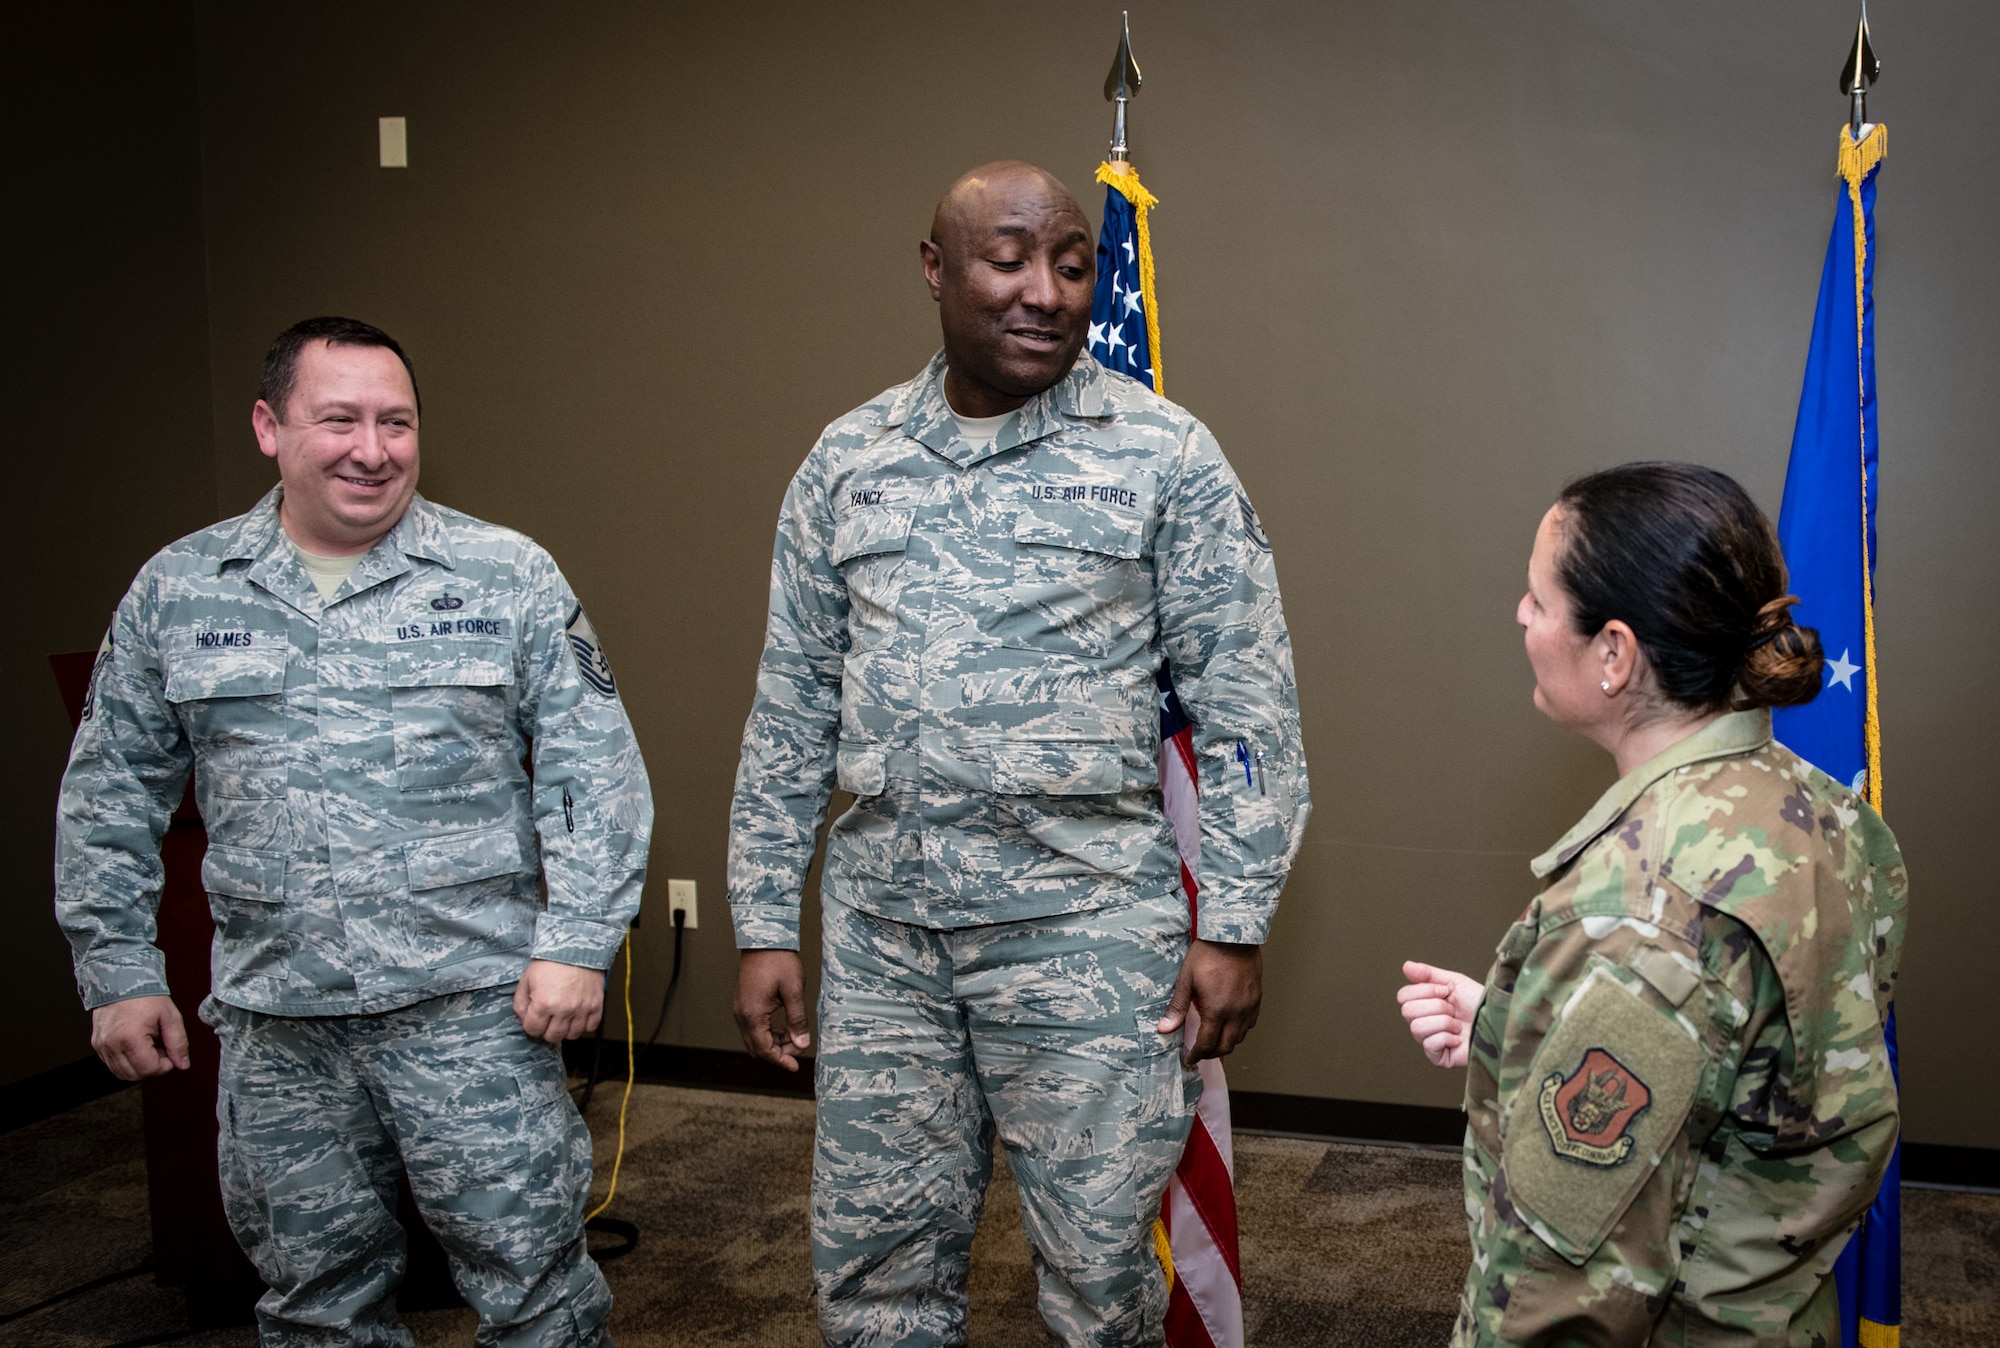 Retiring 932nd Force Support Squadron members, Master Sgt. Jeffery Holmes, left, and Staff Sgt. Germaine Yancy are thanked for their years of service during a combined coin presentation by 932nd Command Chief Barbara Gilmore, Nov. 16, 2019, Scott Air Force Base, Illinois.  Between Holmes and Yancy they have more than 54 years of military service, with Yancy having served in the Marines, Navy, Illinois Army National Guard and the Air Force Reserve. (U.S. Air Force photo by Master Sgt. Christopher Parr)